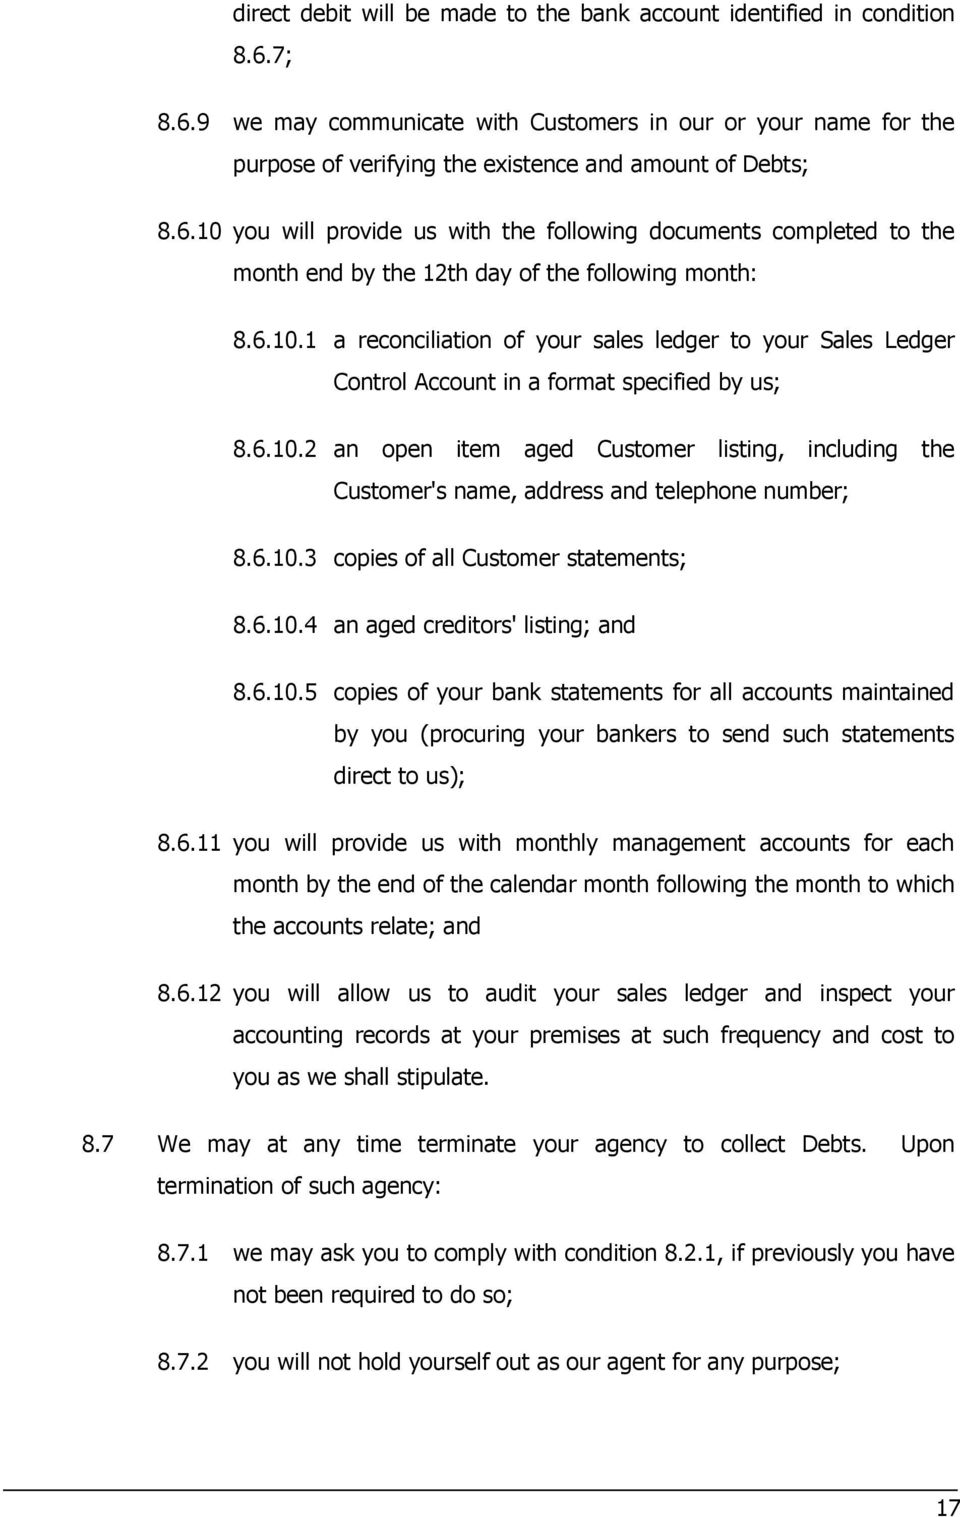 6.10.2 an open item aged Customer listing, including the Customer's name, address and telephone number; 8.6.10.3 copies of all Customer statements; 8.6.10.4 an aged creditors' listing; and 8.6.10.5 copies of your bank statements for all accounts maintained by you (procuring your bankers to send such statements direct to us); 8.